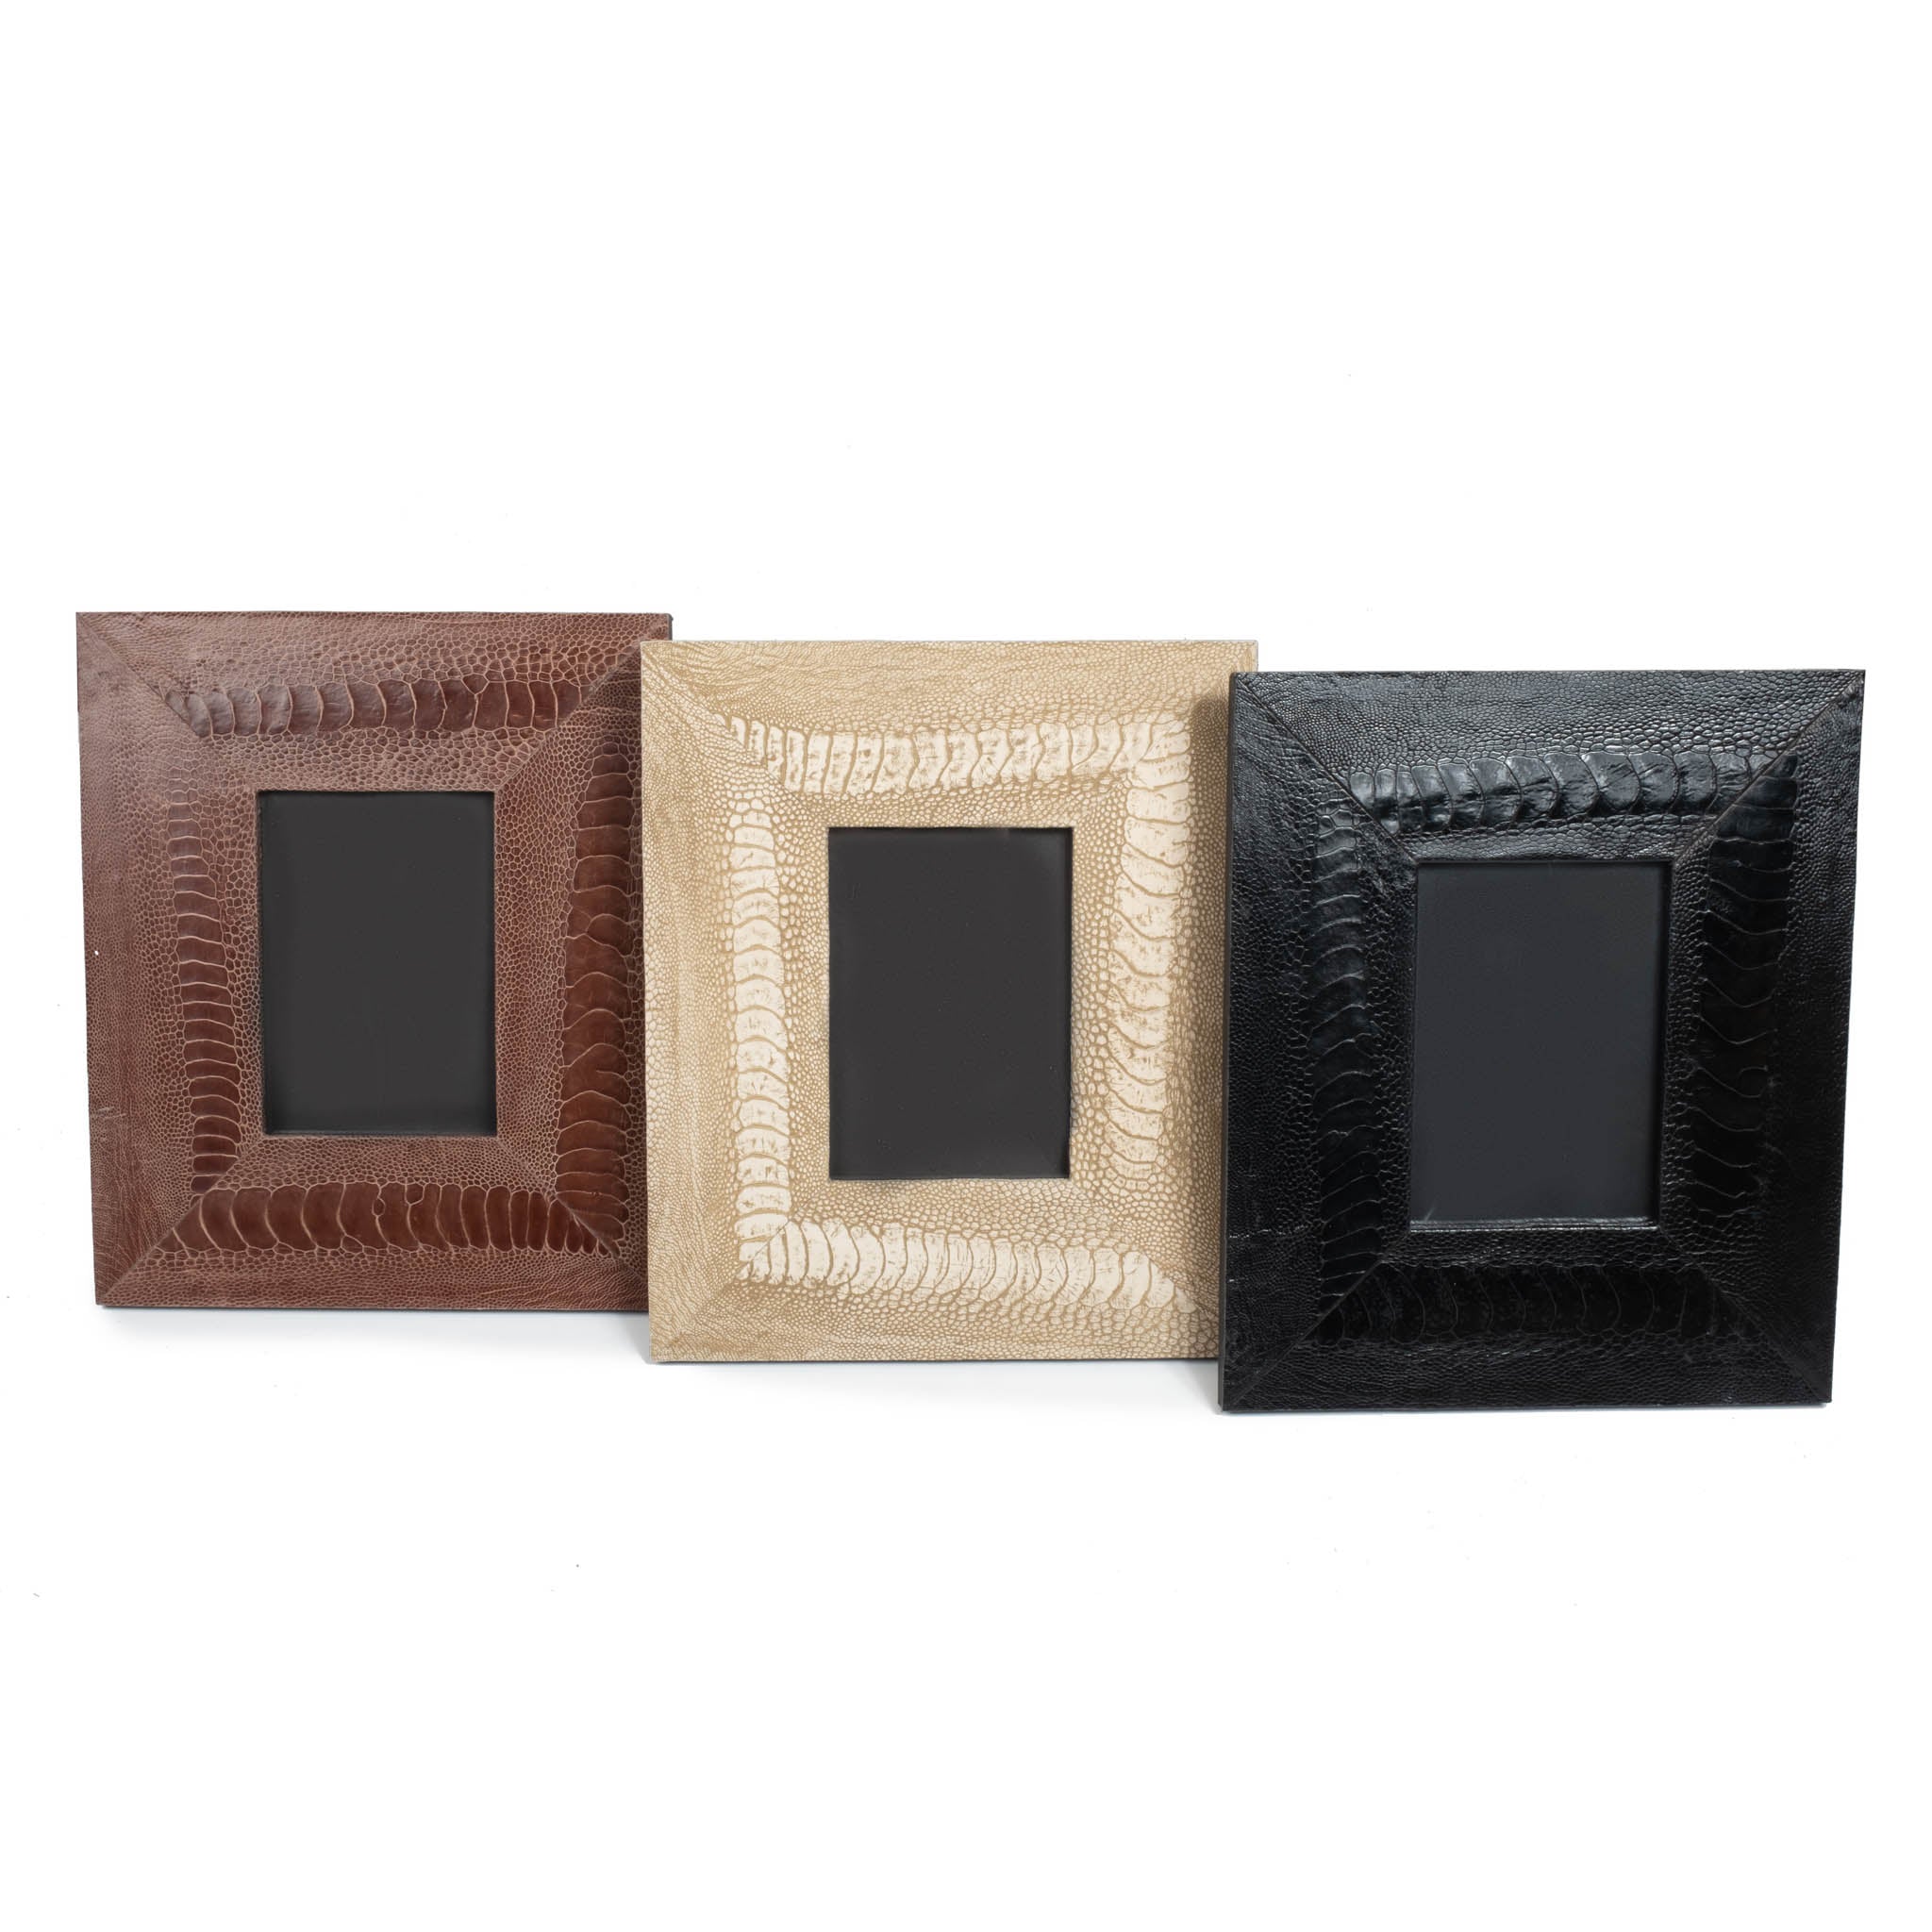 Ostrich Shin Leather Photo Frame - Stone-Washed